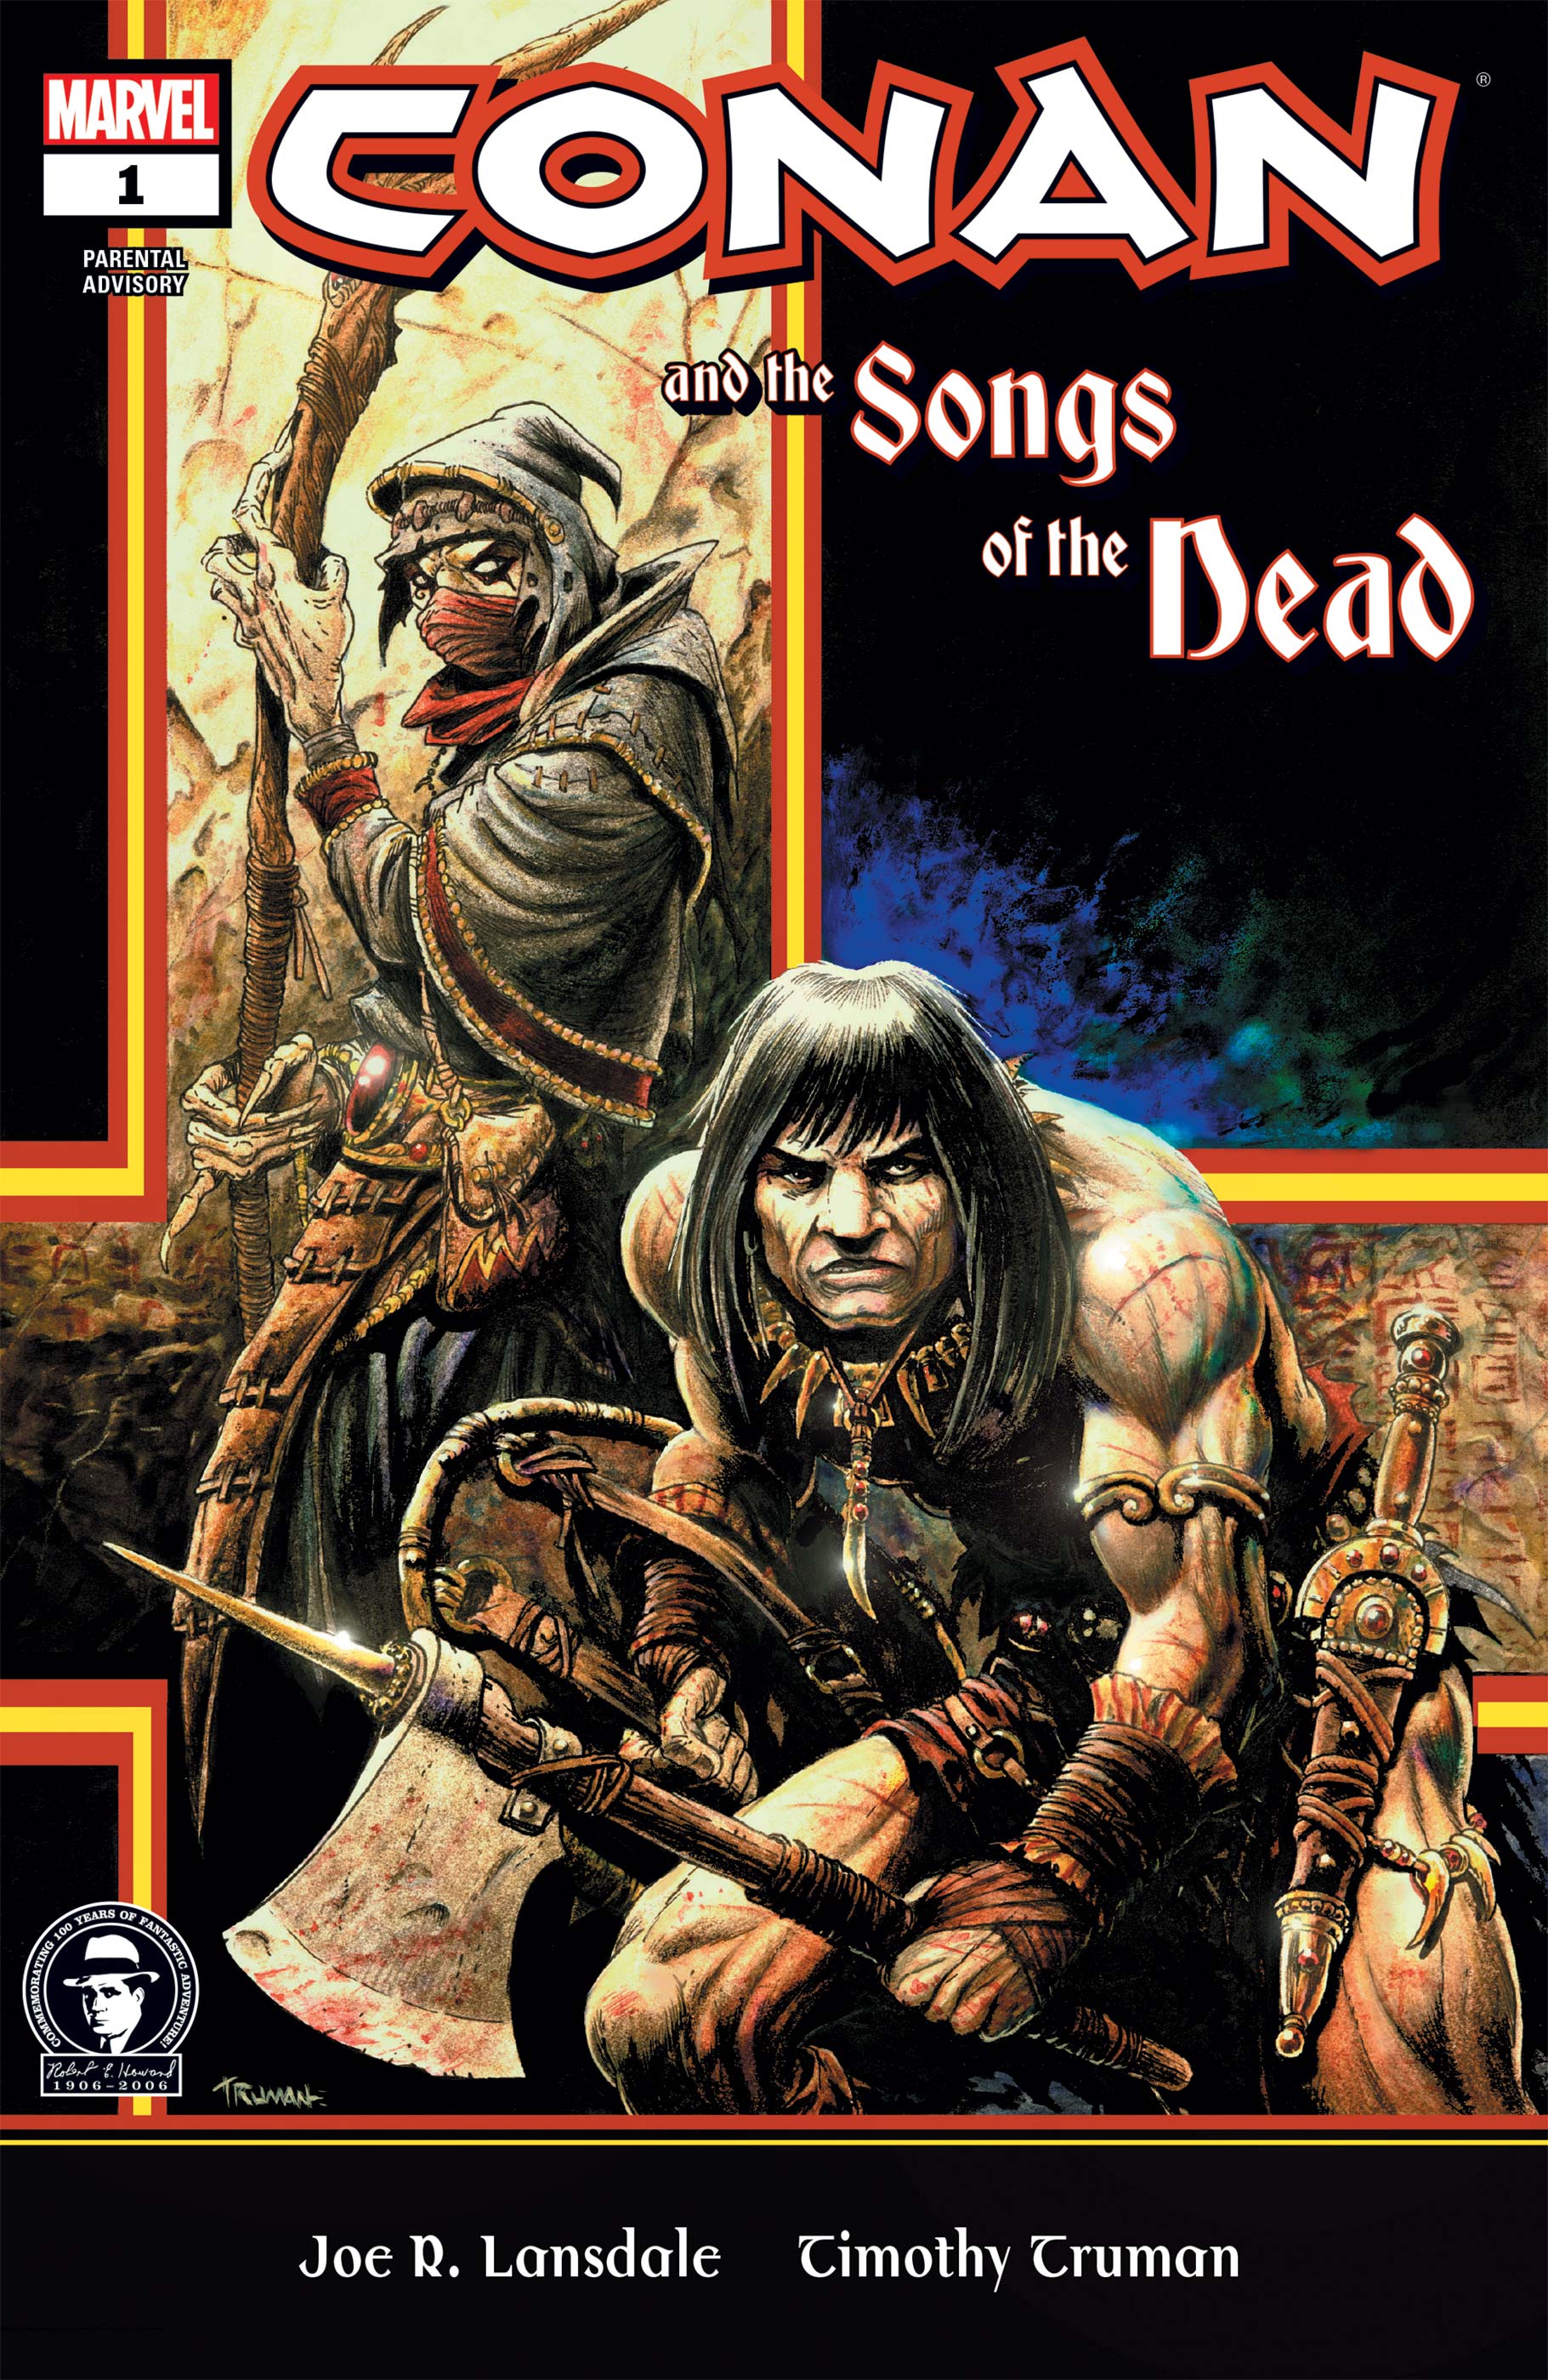 Conan and the Songs of the Dead (2006) #1